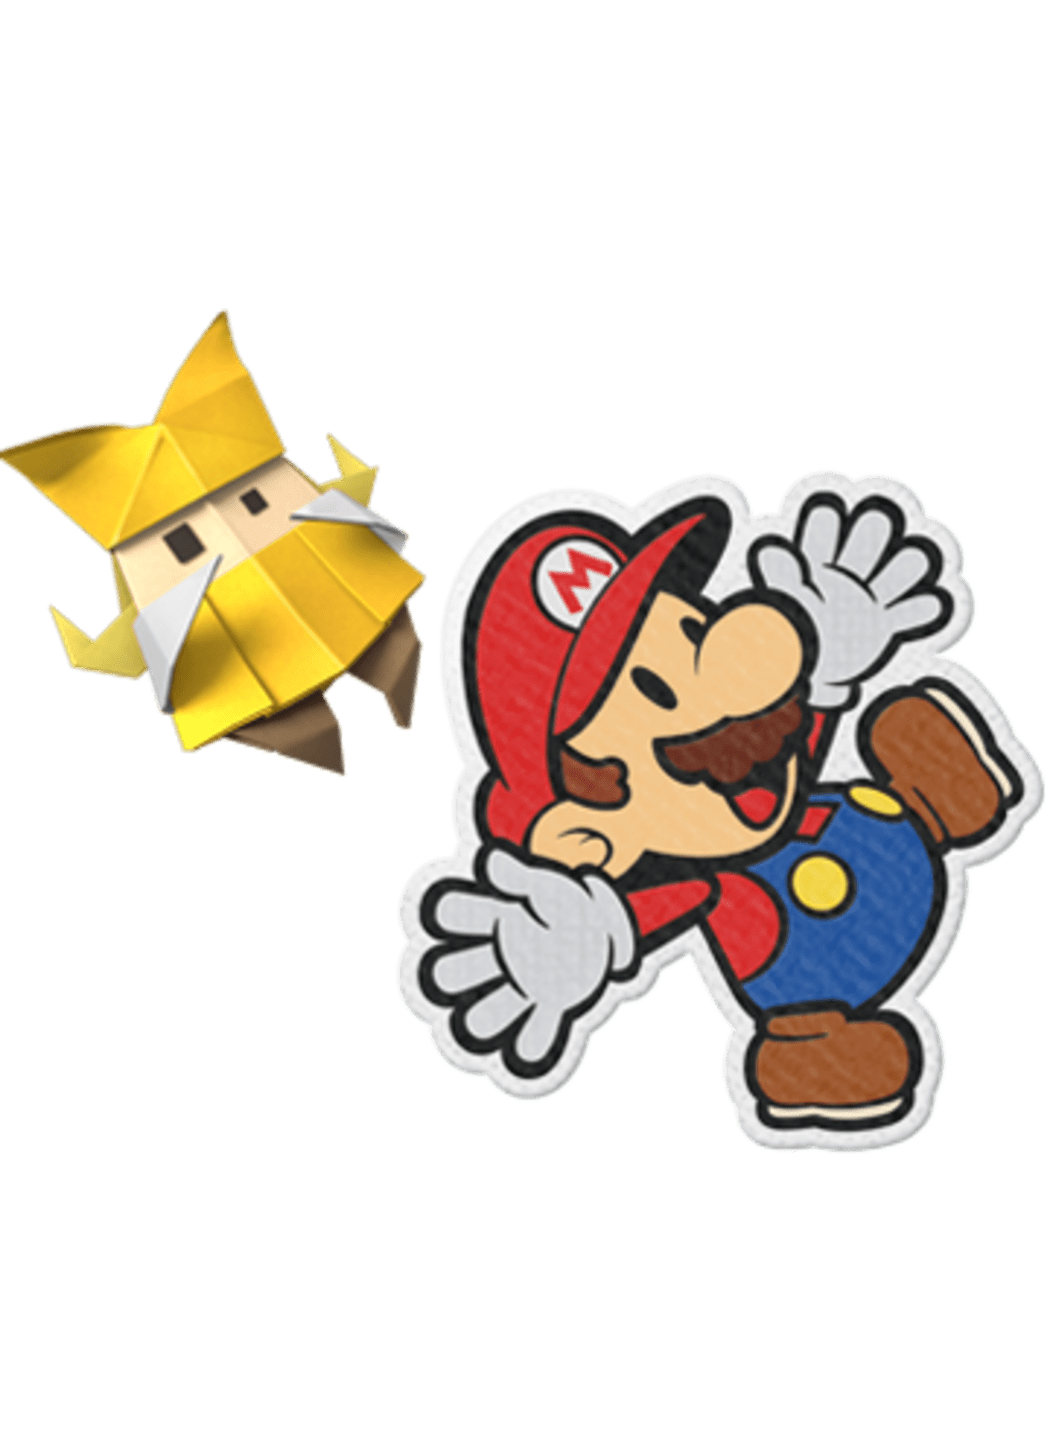 Adaptation Onset communication Paper Mario™: The Origami King for Nintendo Switch - Nintendo Official Site